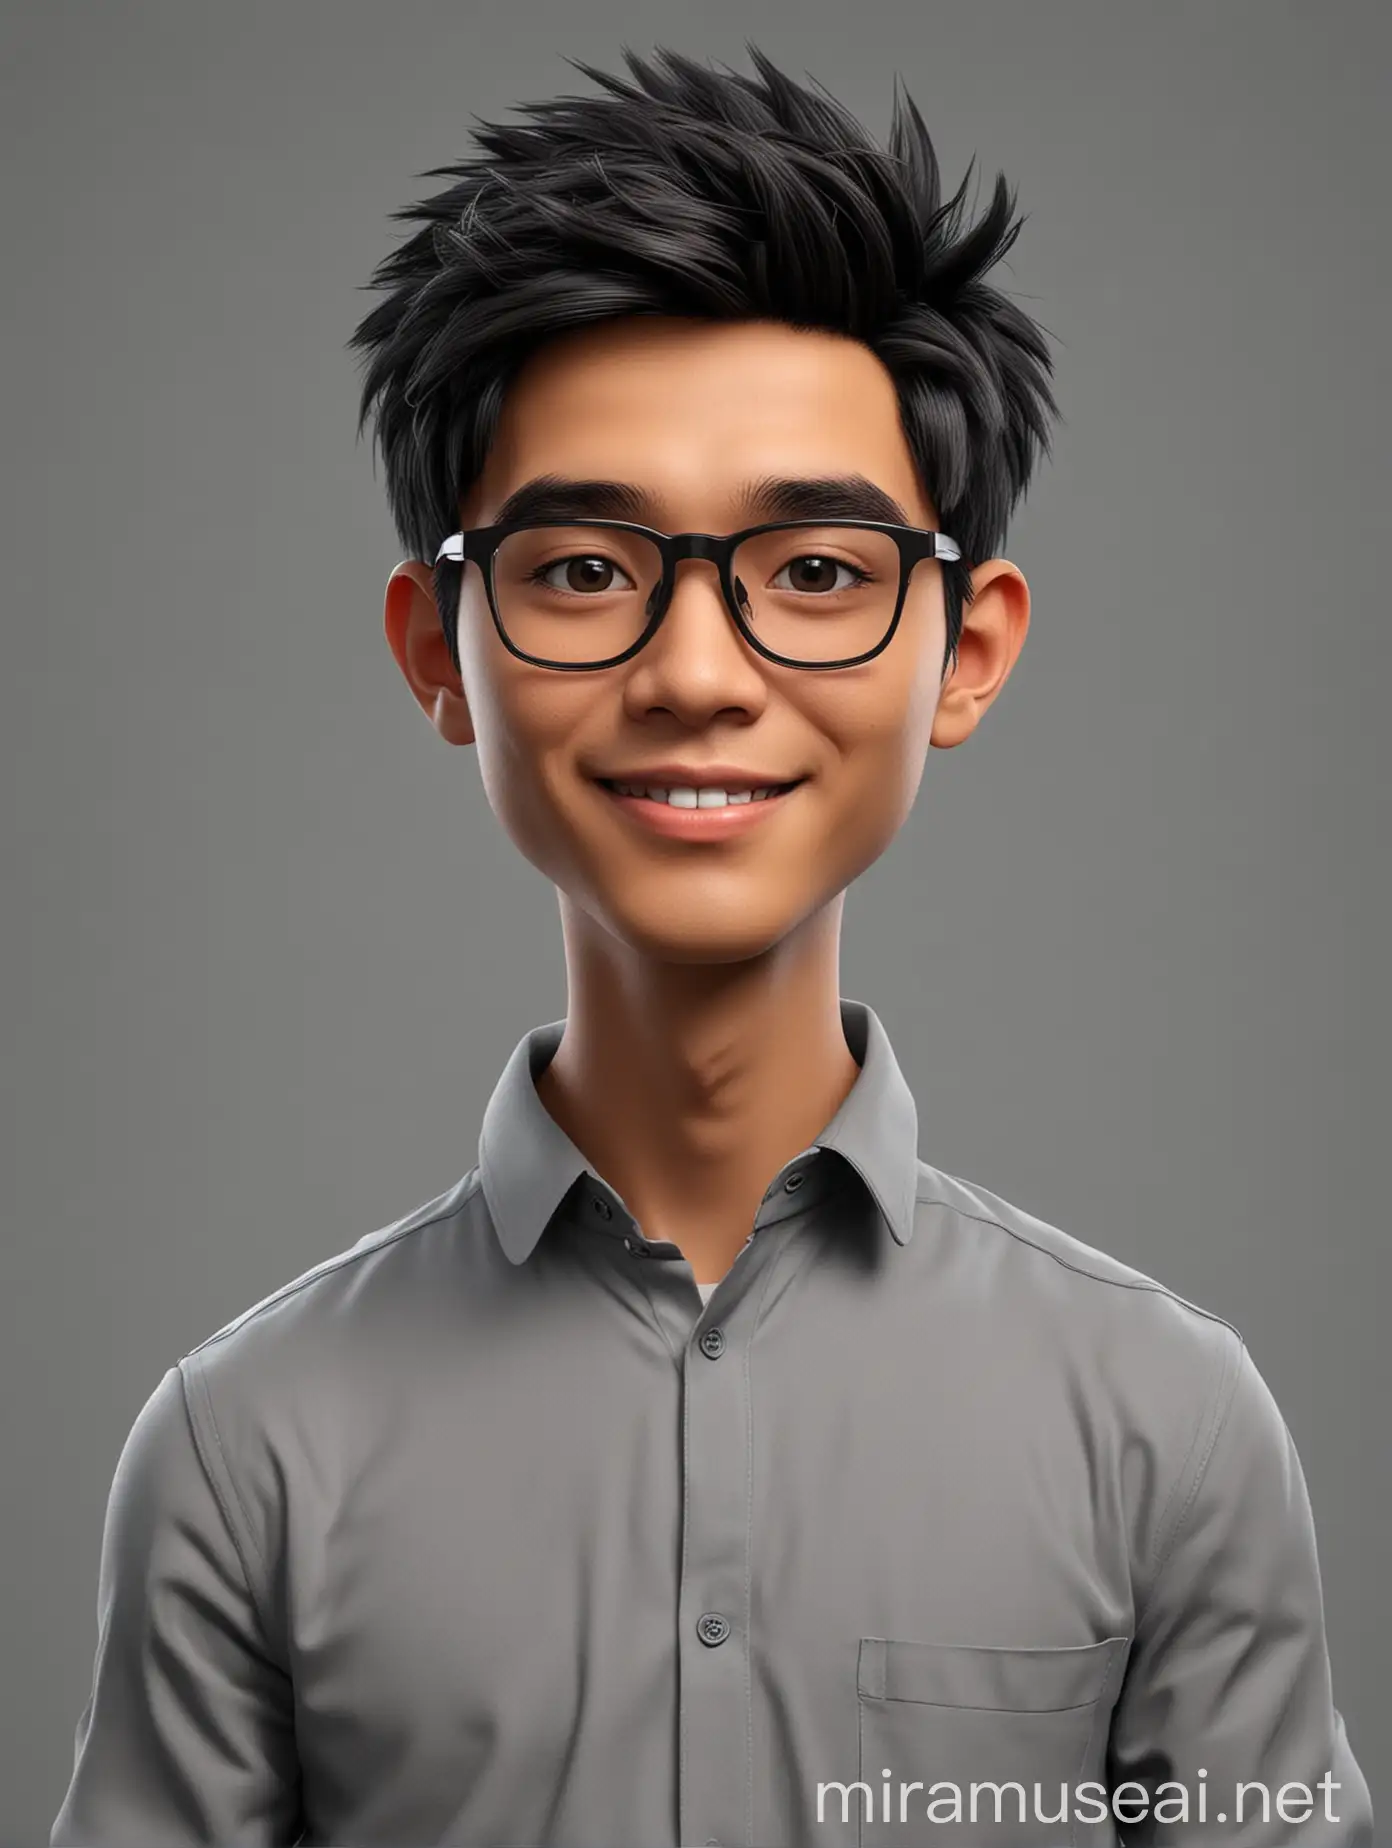 Indonesian Man with Glasses and Comma Hair Style in Studio Portrait